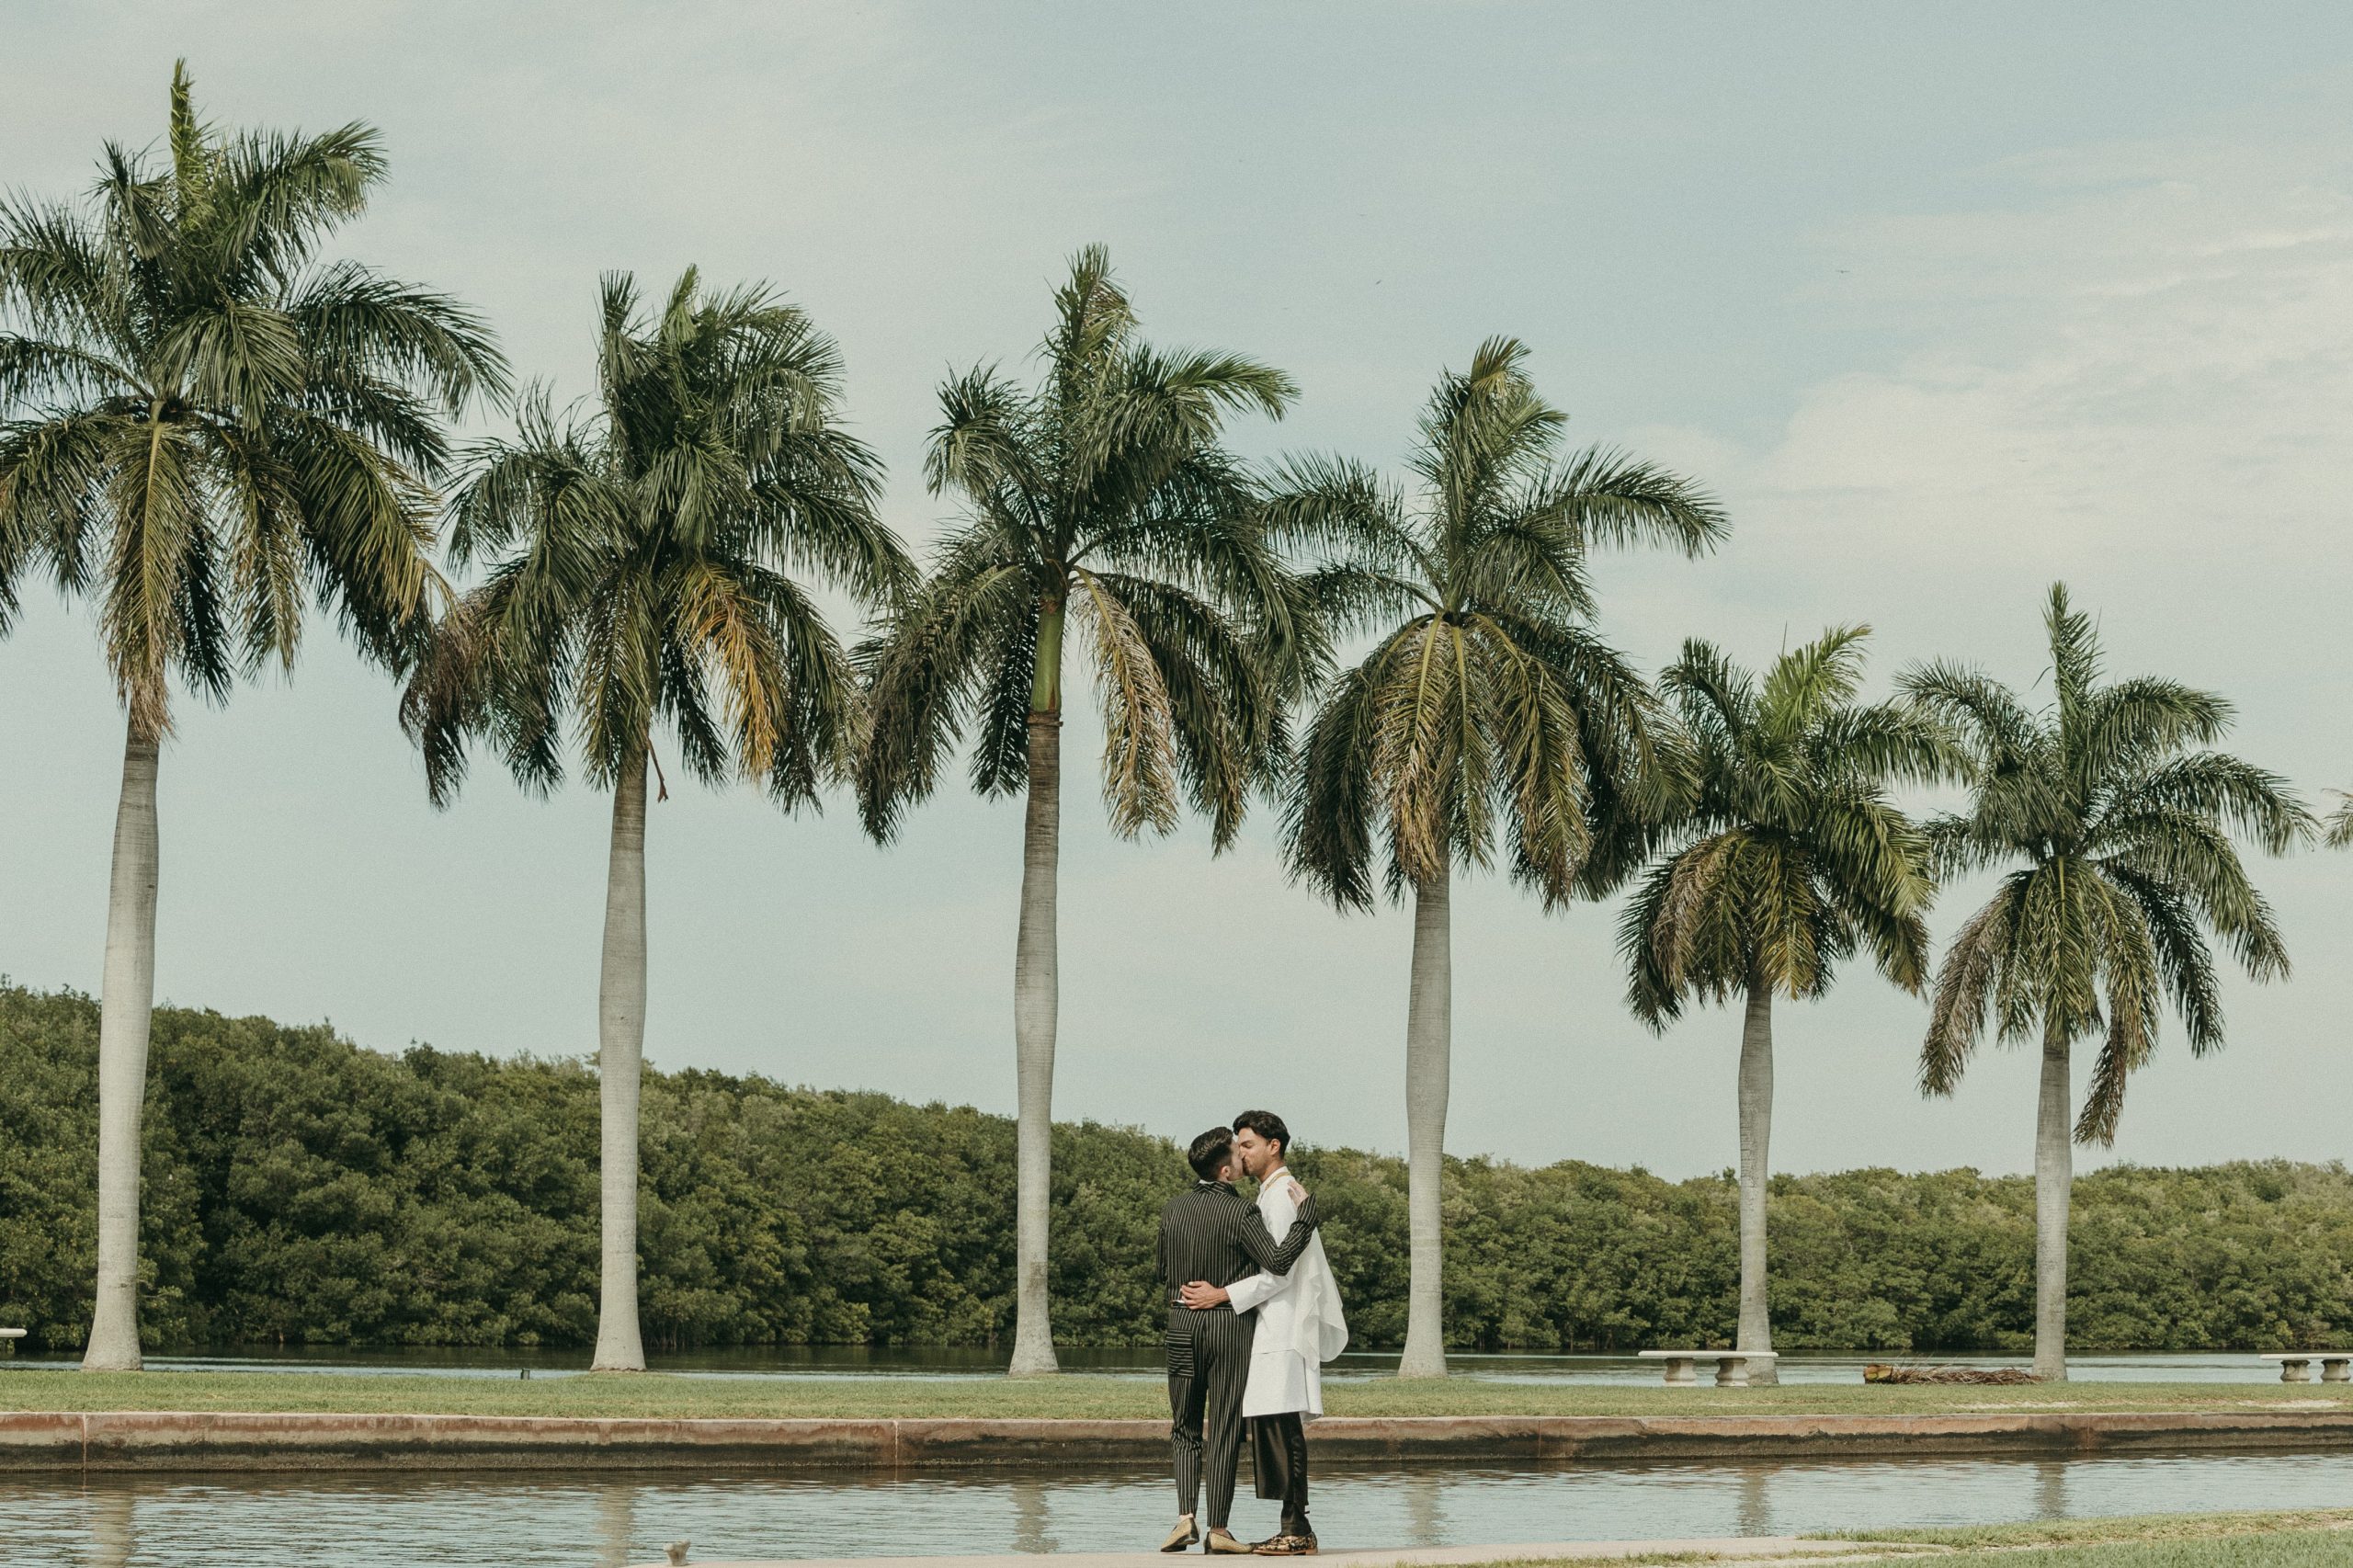 Grooms embracing each other while at Deering Estate's waterfront lawn. Biscayne Bay and six palm trees are in the background, and mangrove trees are visible behind the palm trees.